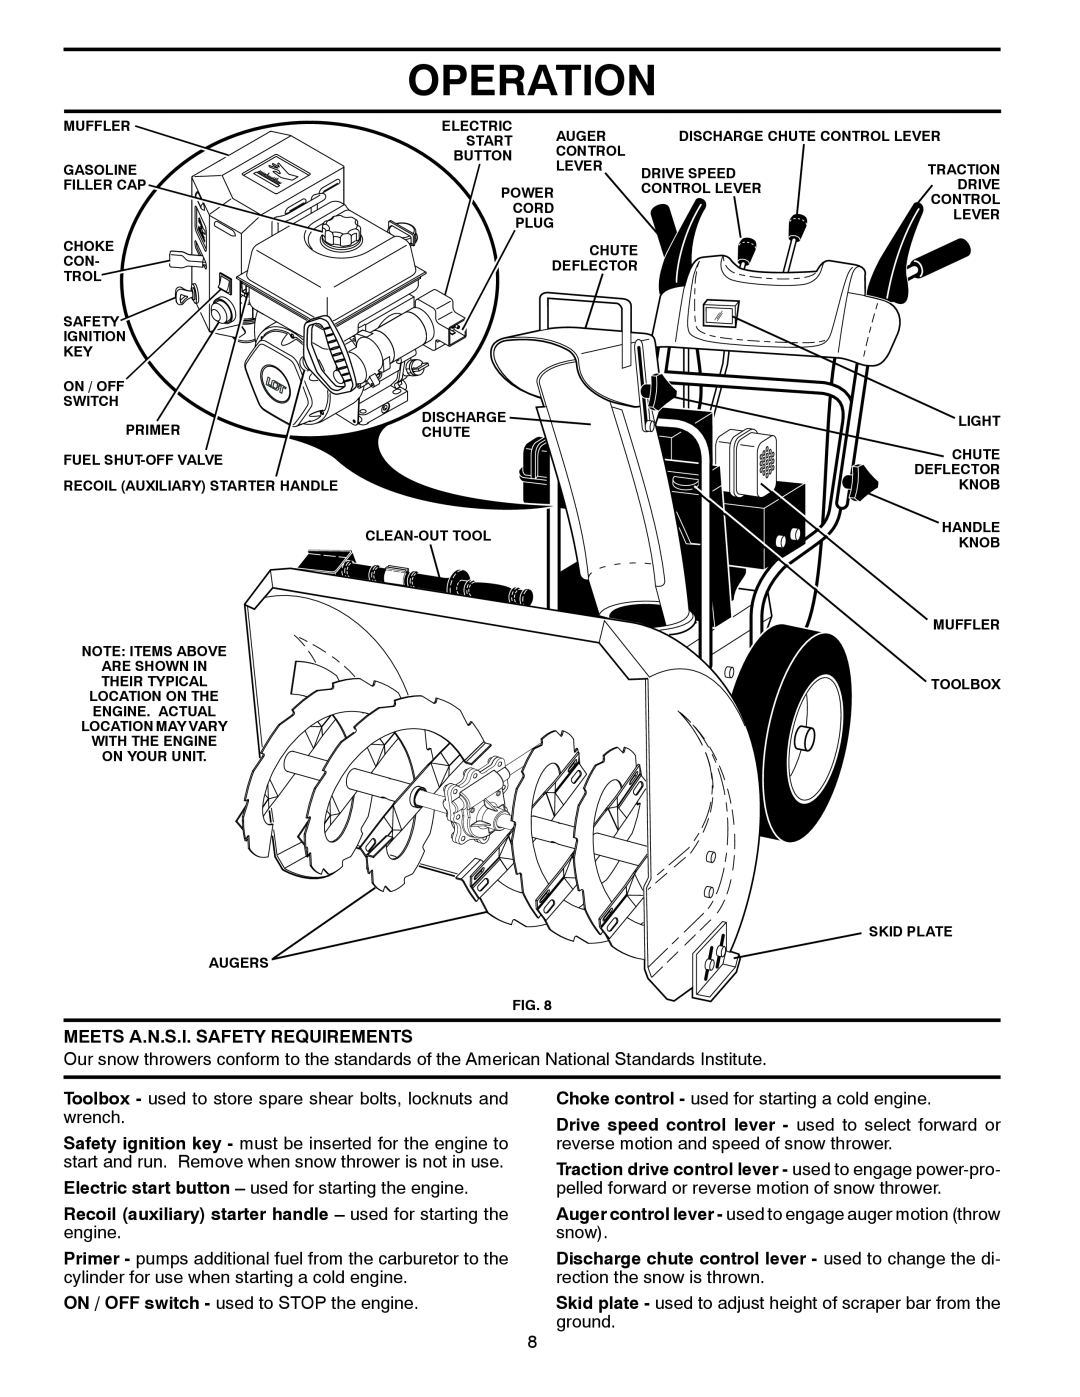 McCulloch 96192004102 Operation, Meets A.N.S.I. Safety Requirements, Electric start button - used for starting the engine 